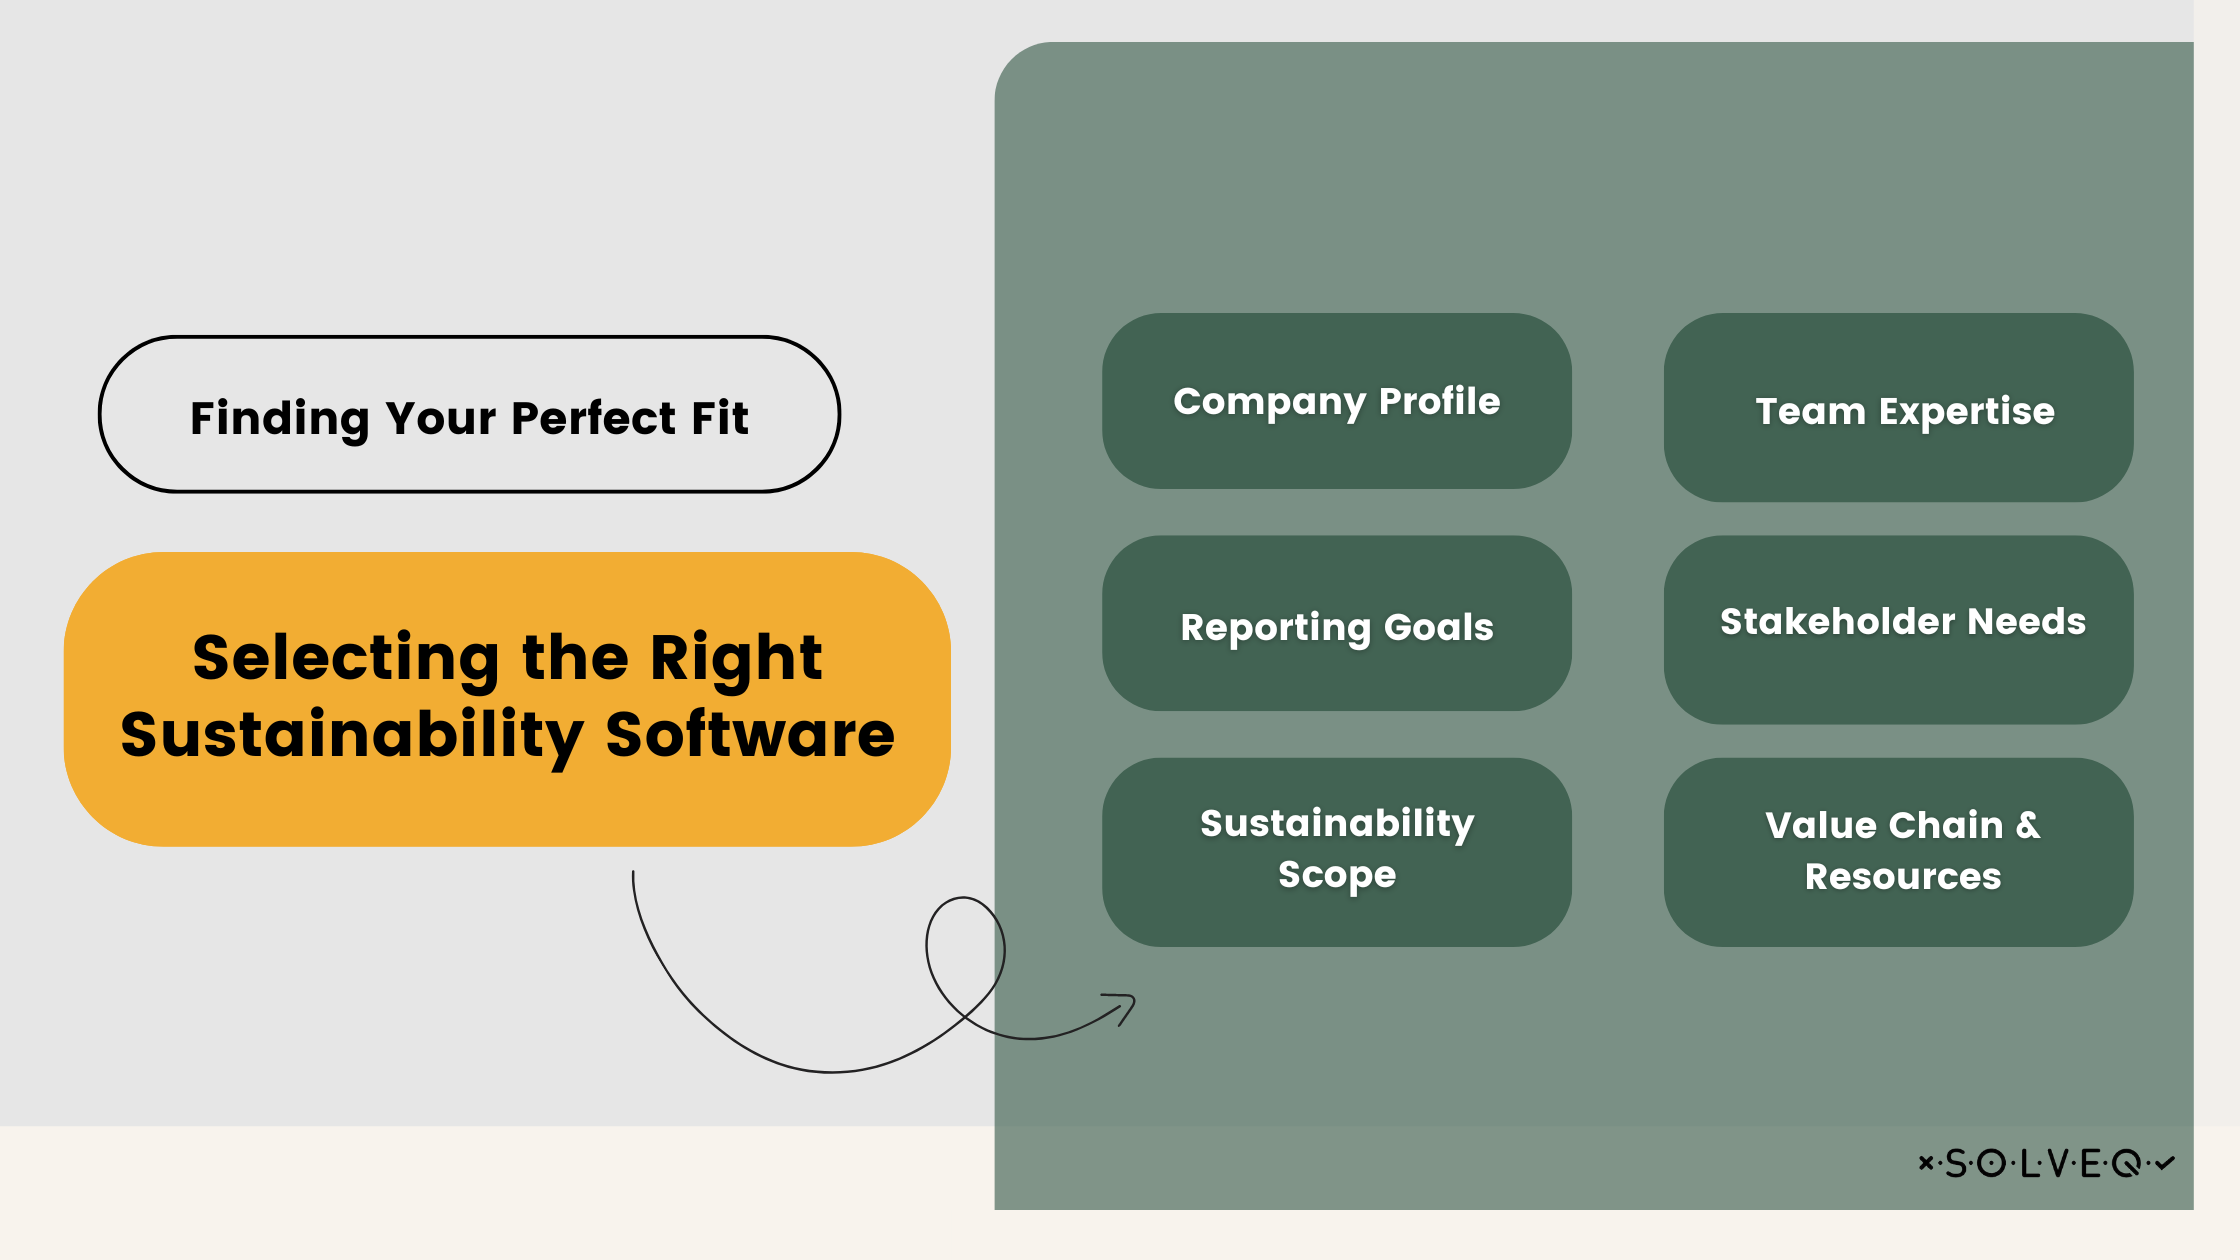 Finding Your Perfect Fit: Selecting the Right Sustainability Software